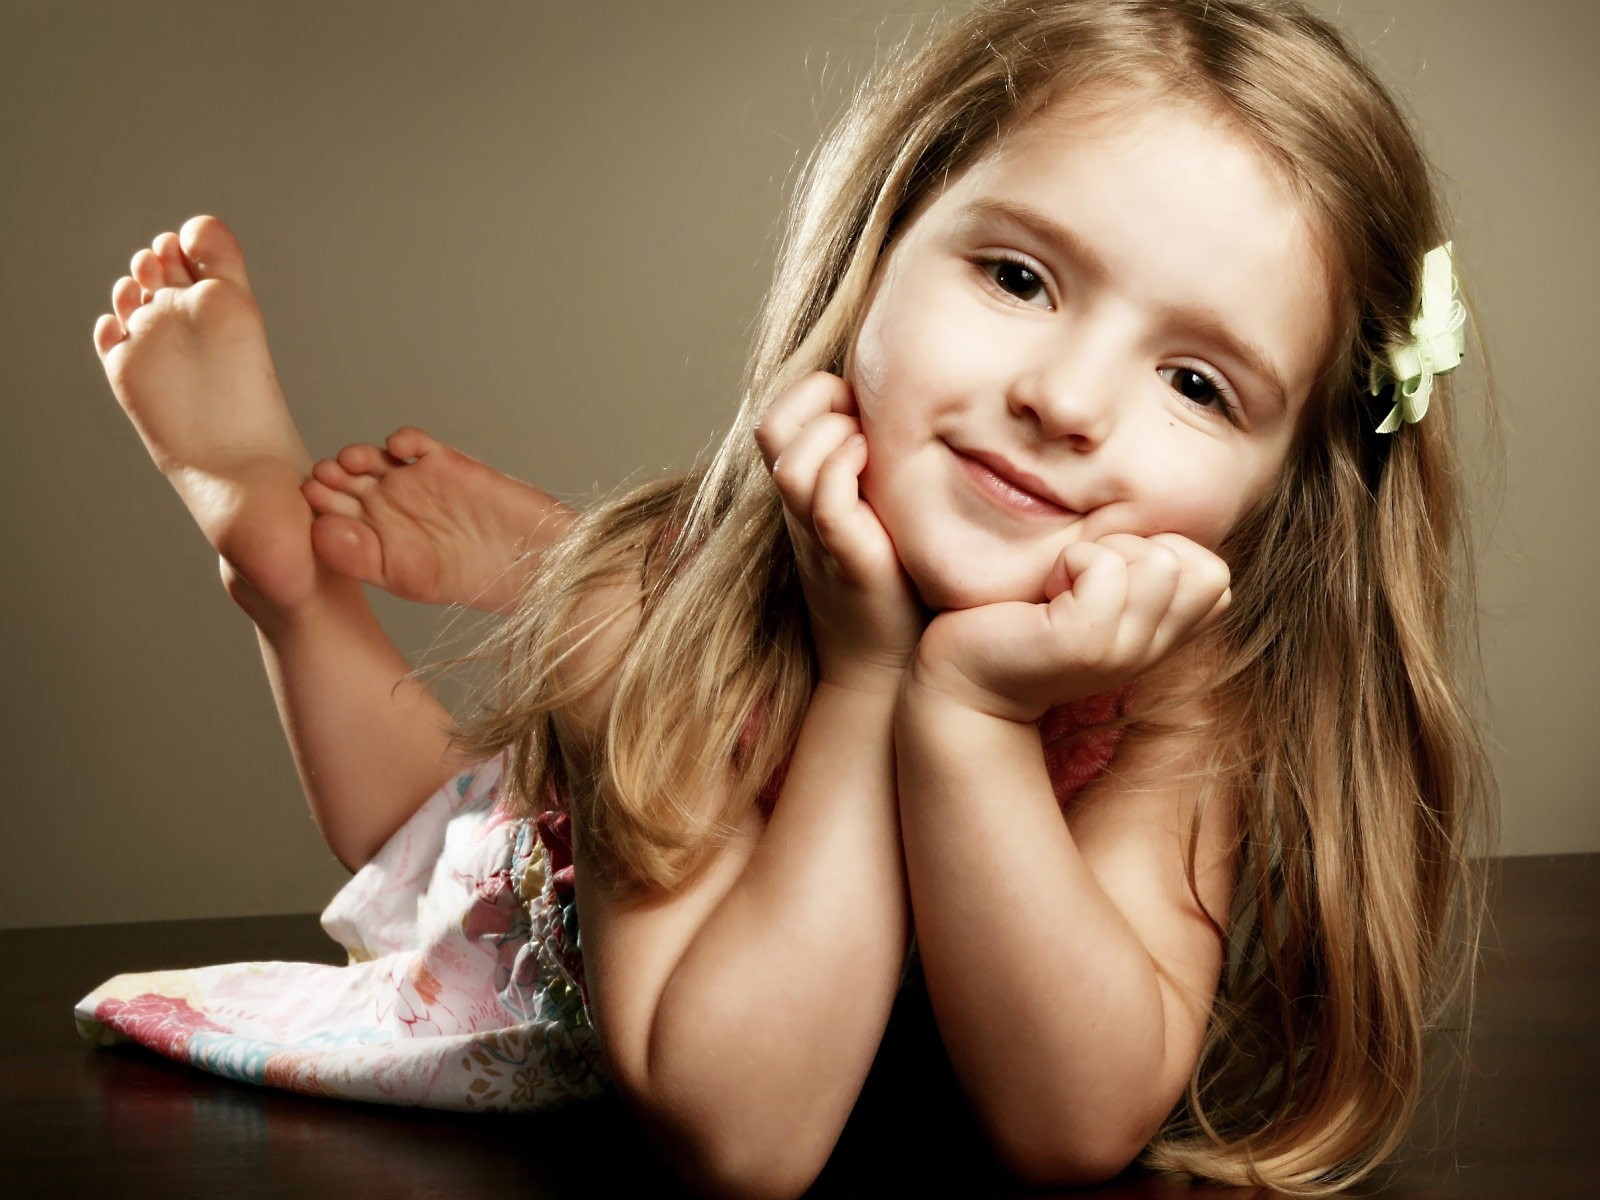 Cute Baby Pictures,cute Baby Wallpapers - Little Blonde Girl Feet - HD Wallpaper 